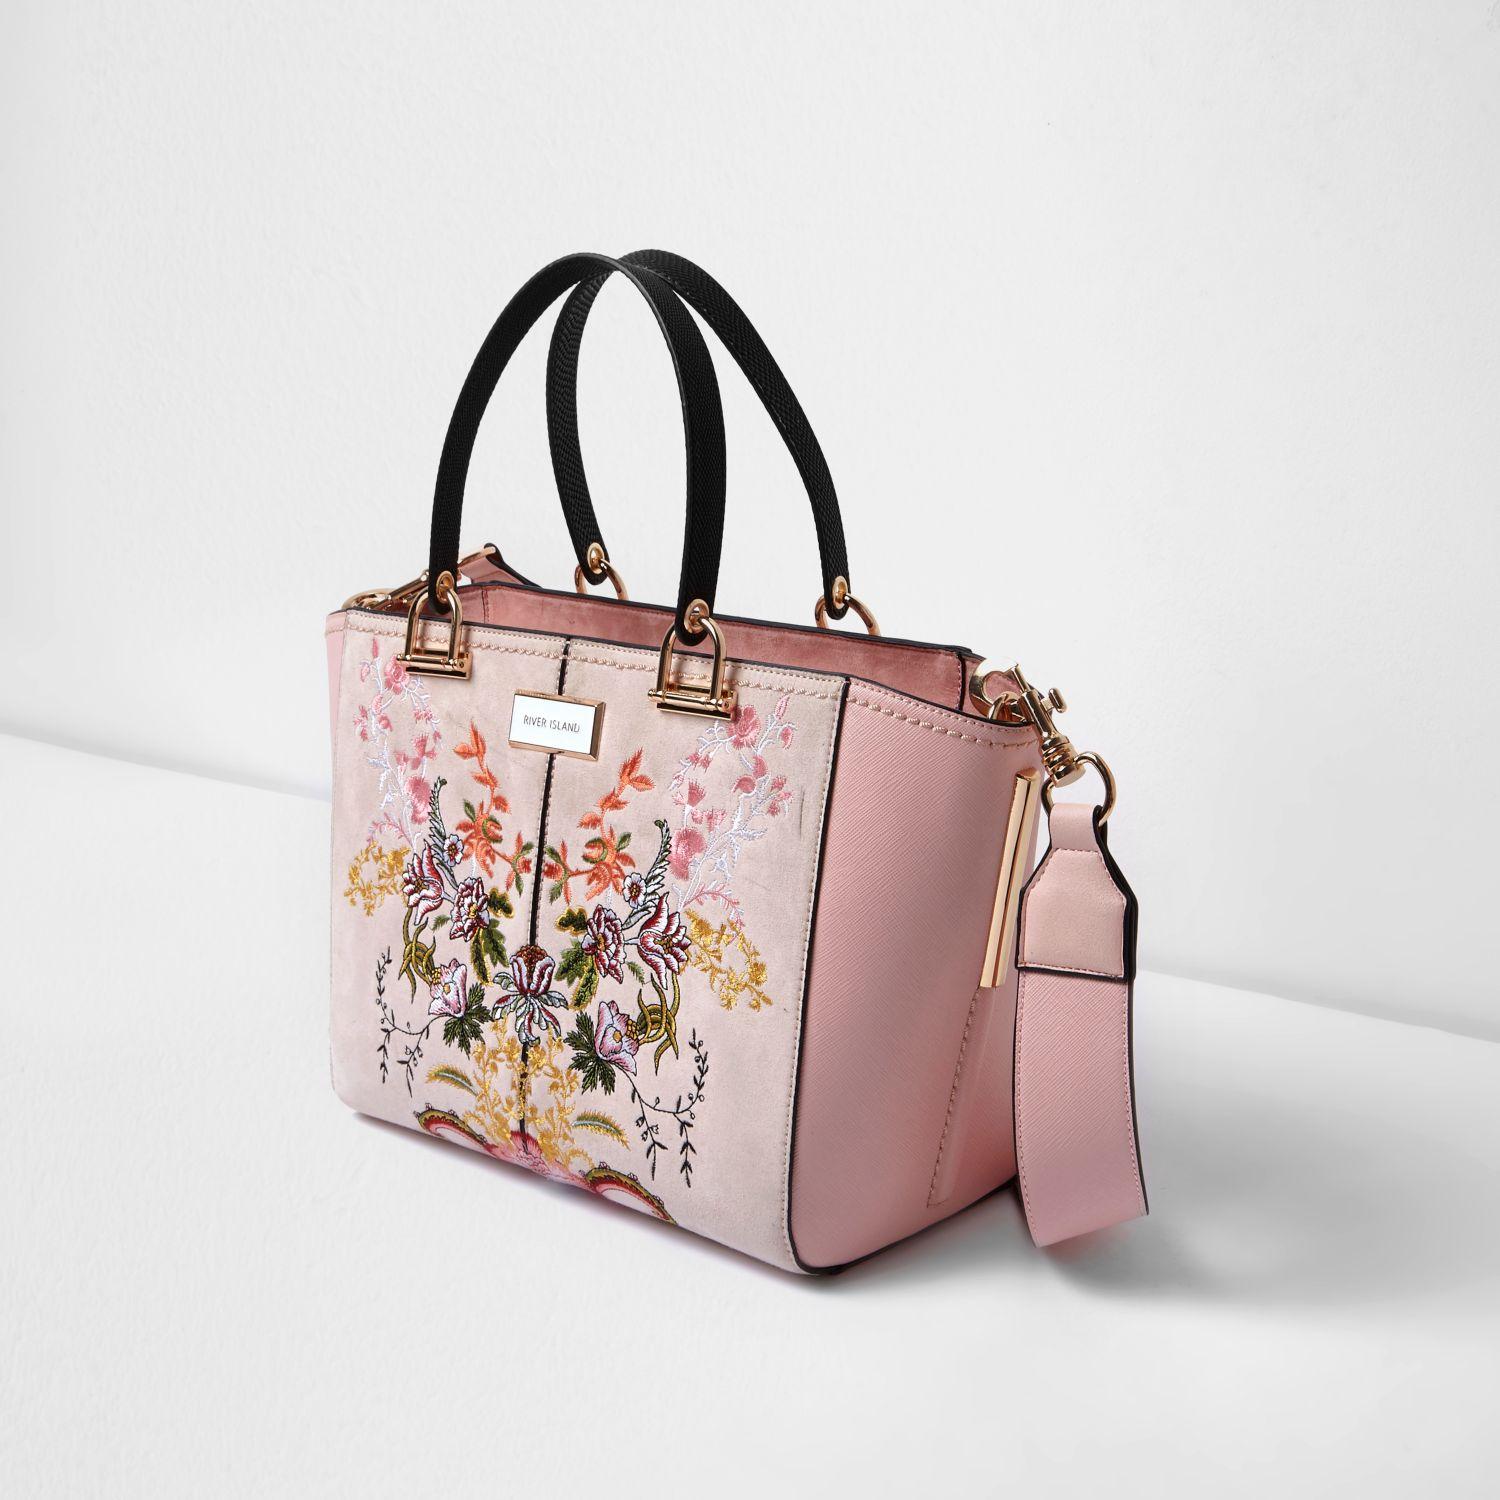 River island Pink Floral Embroidered Tote Bag in Pink | Lyst